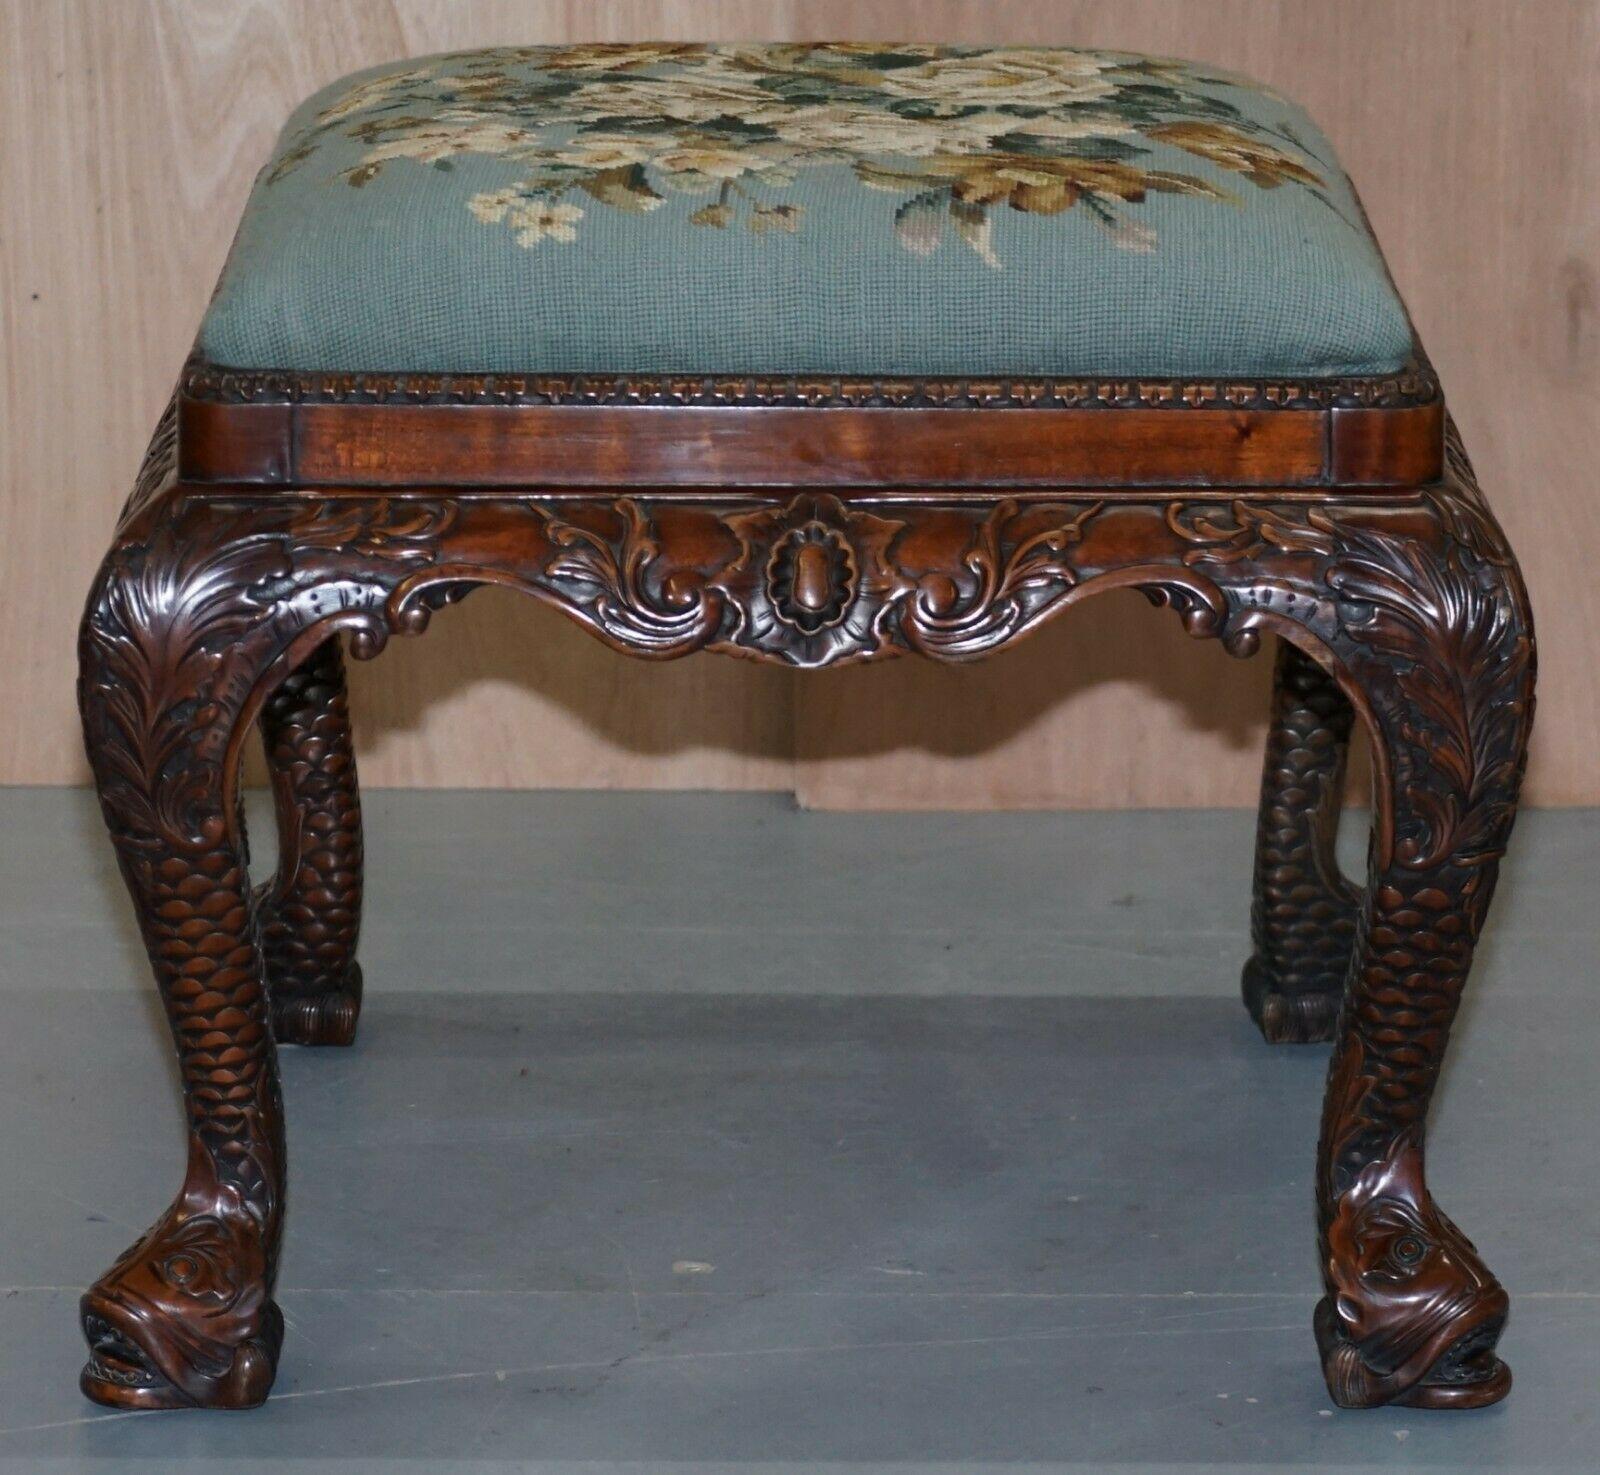 We are delighted to this lovely hand carved George II style mahogany stool with original floral embroidered upholstery

A very good looking well made and decorative piece, this is like art furniture to me, you can place it in any setting and it